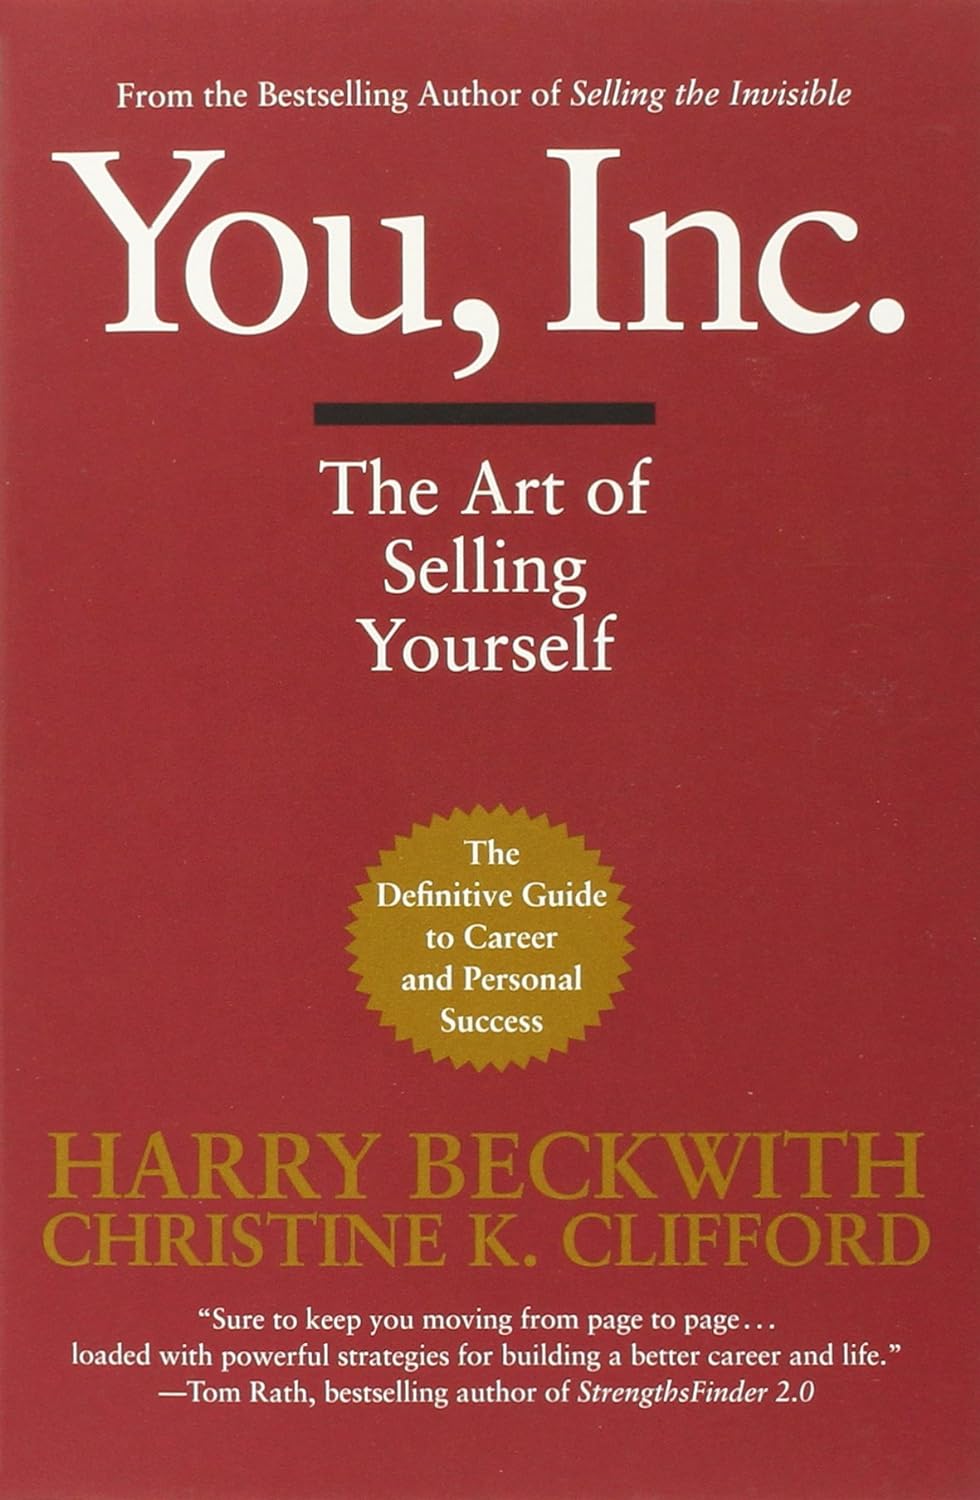 Harry Beckwith _ Christine K. Clifford - You, Inc. The Art of Selling Yourself (Warner Business)